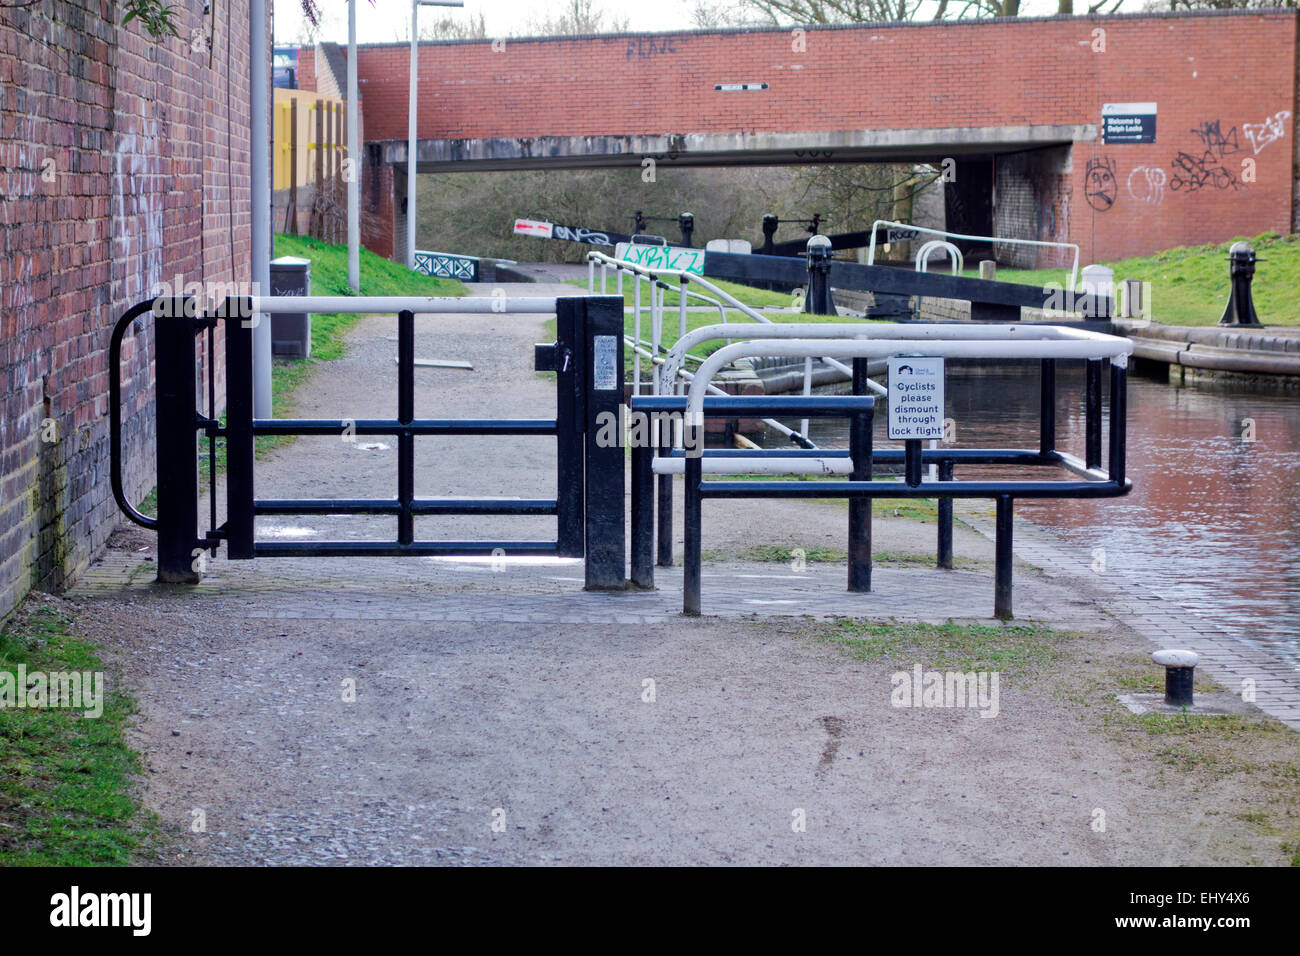 Canal with Barriers Restricting Vehicle Access & Key Radar Scheme to Allow Disabled Access, UK Stock Photo